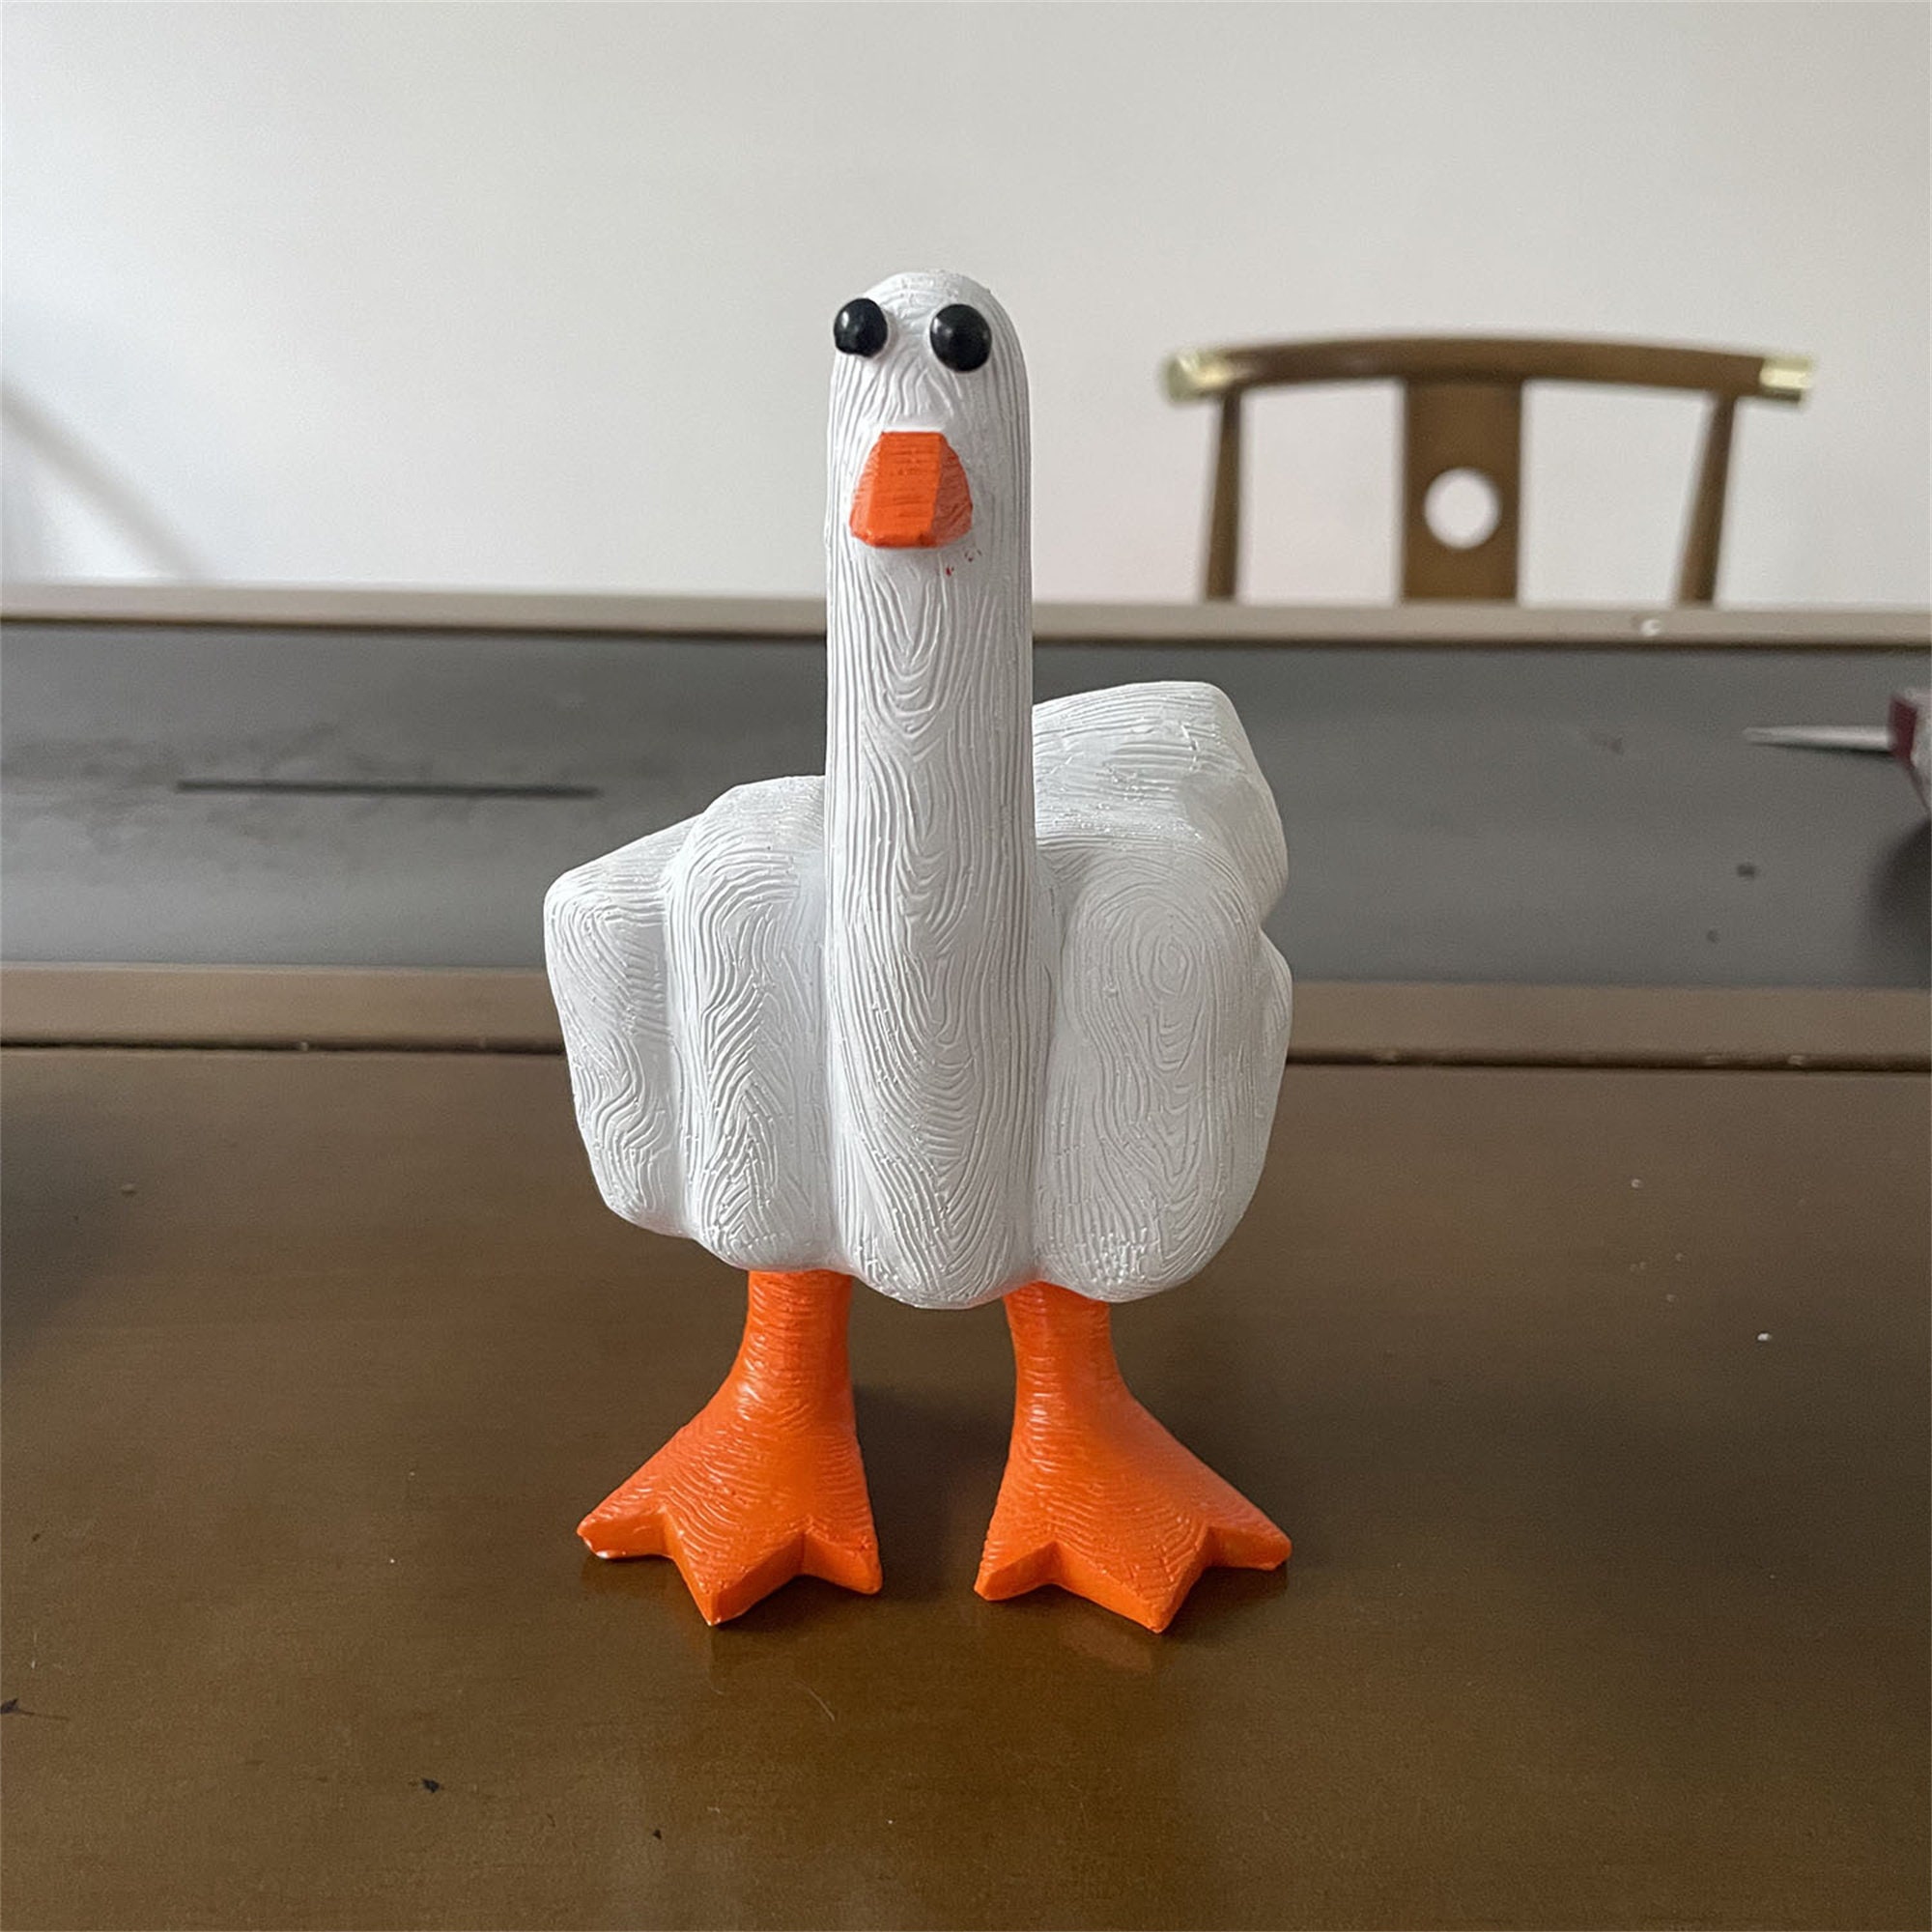 Much buff. Very wow. : r/untitledgoosegame